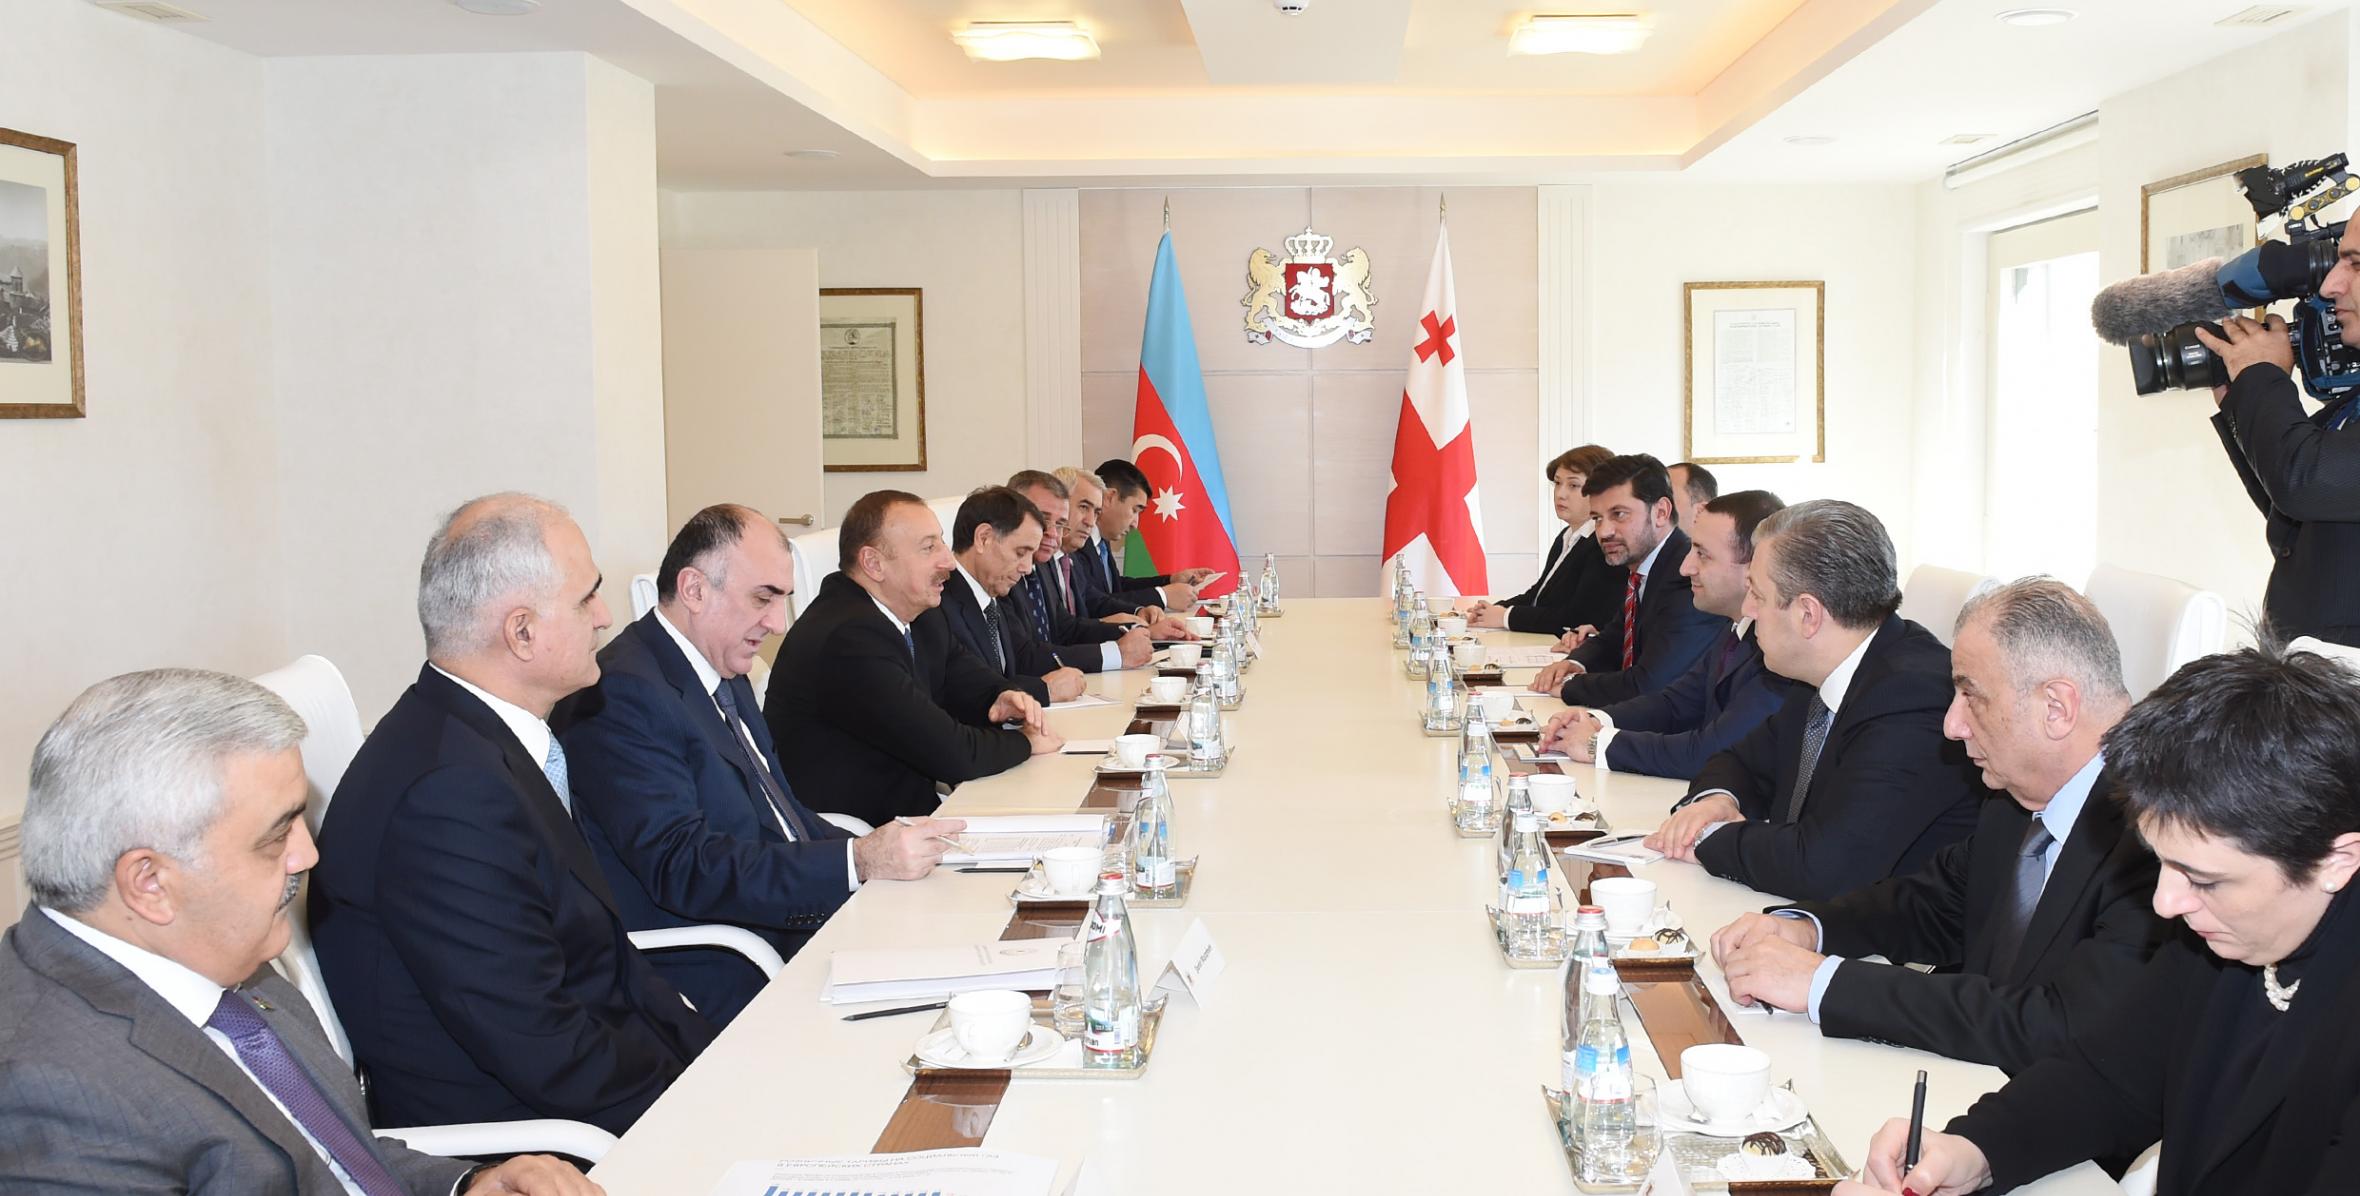 Ilham Aliyev and the Georgian Prime Minister held an expanded meeting